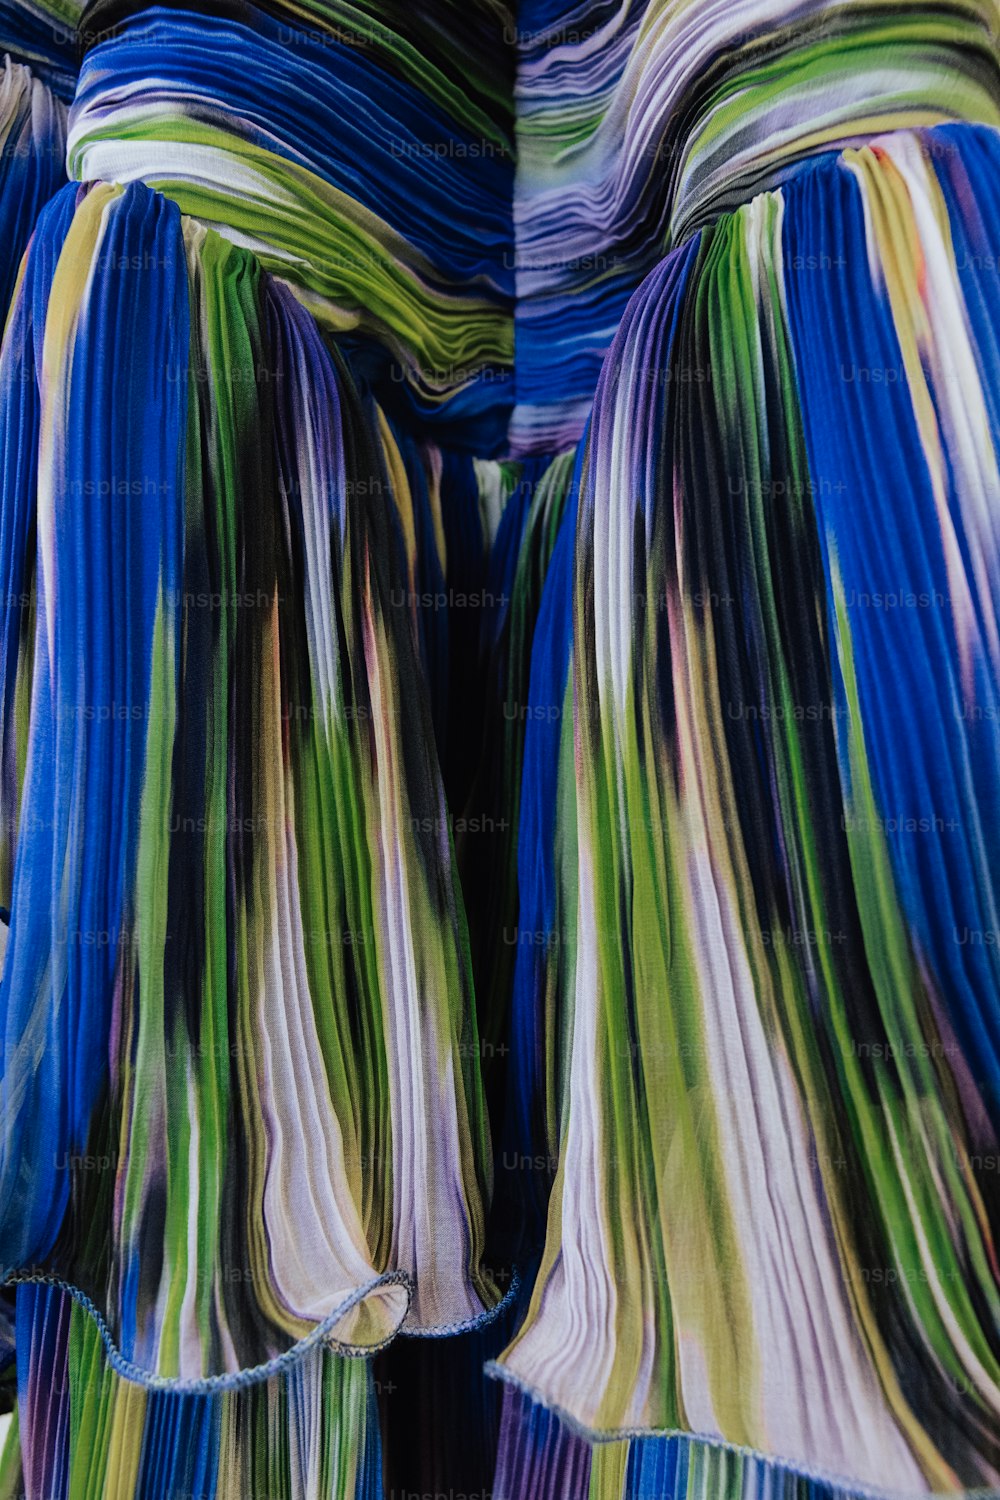 a close up of a colorful dress with a tie